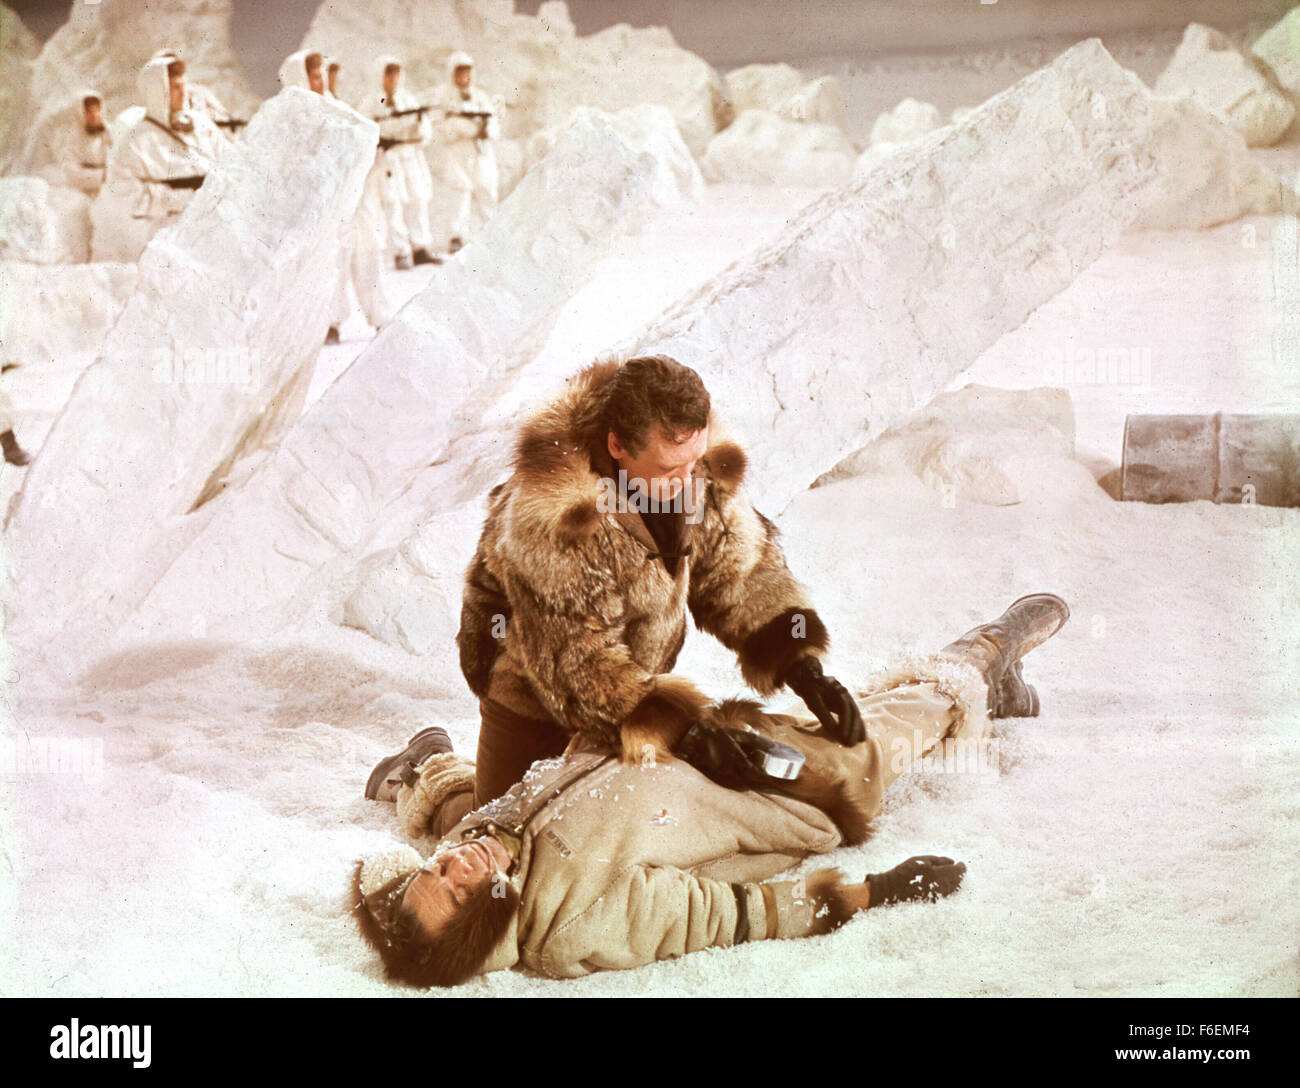 RELEASE DATE: October 23, 1968. MOVIE TITLE: Ice Station Zebra. STUDIO: Filmways Pictures. PLOT: Commander James Ferraday, USN, has new orders: get David Jones, a British civilian, Captain Anders, a tough Marine with a platoon of troops, Boris Vasilov, a friendly Russian, and the crew of the nuclear sub USS Tigerfish to the North Pole to rescue the crew of Drift Ice Station Zebra, a weather station at the top of the world. The mission takes on new and dangerous twists as the crew finds out that all is not as it seems at Zebra, and that someone will stop at nothing to prevent the mission from b Stock Photo